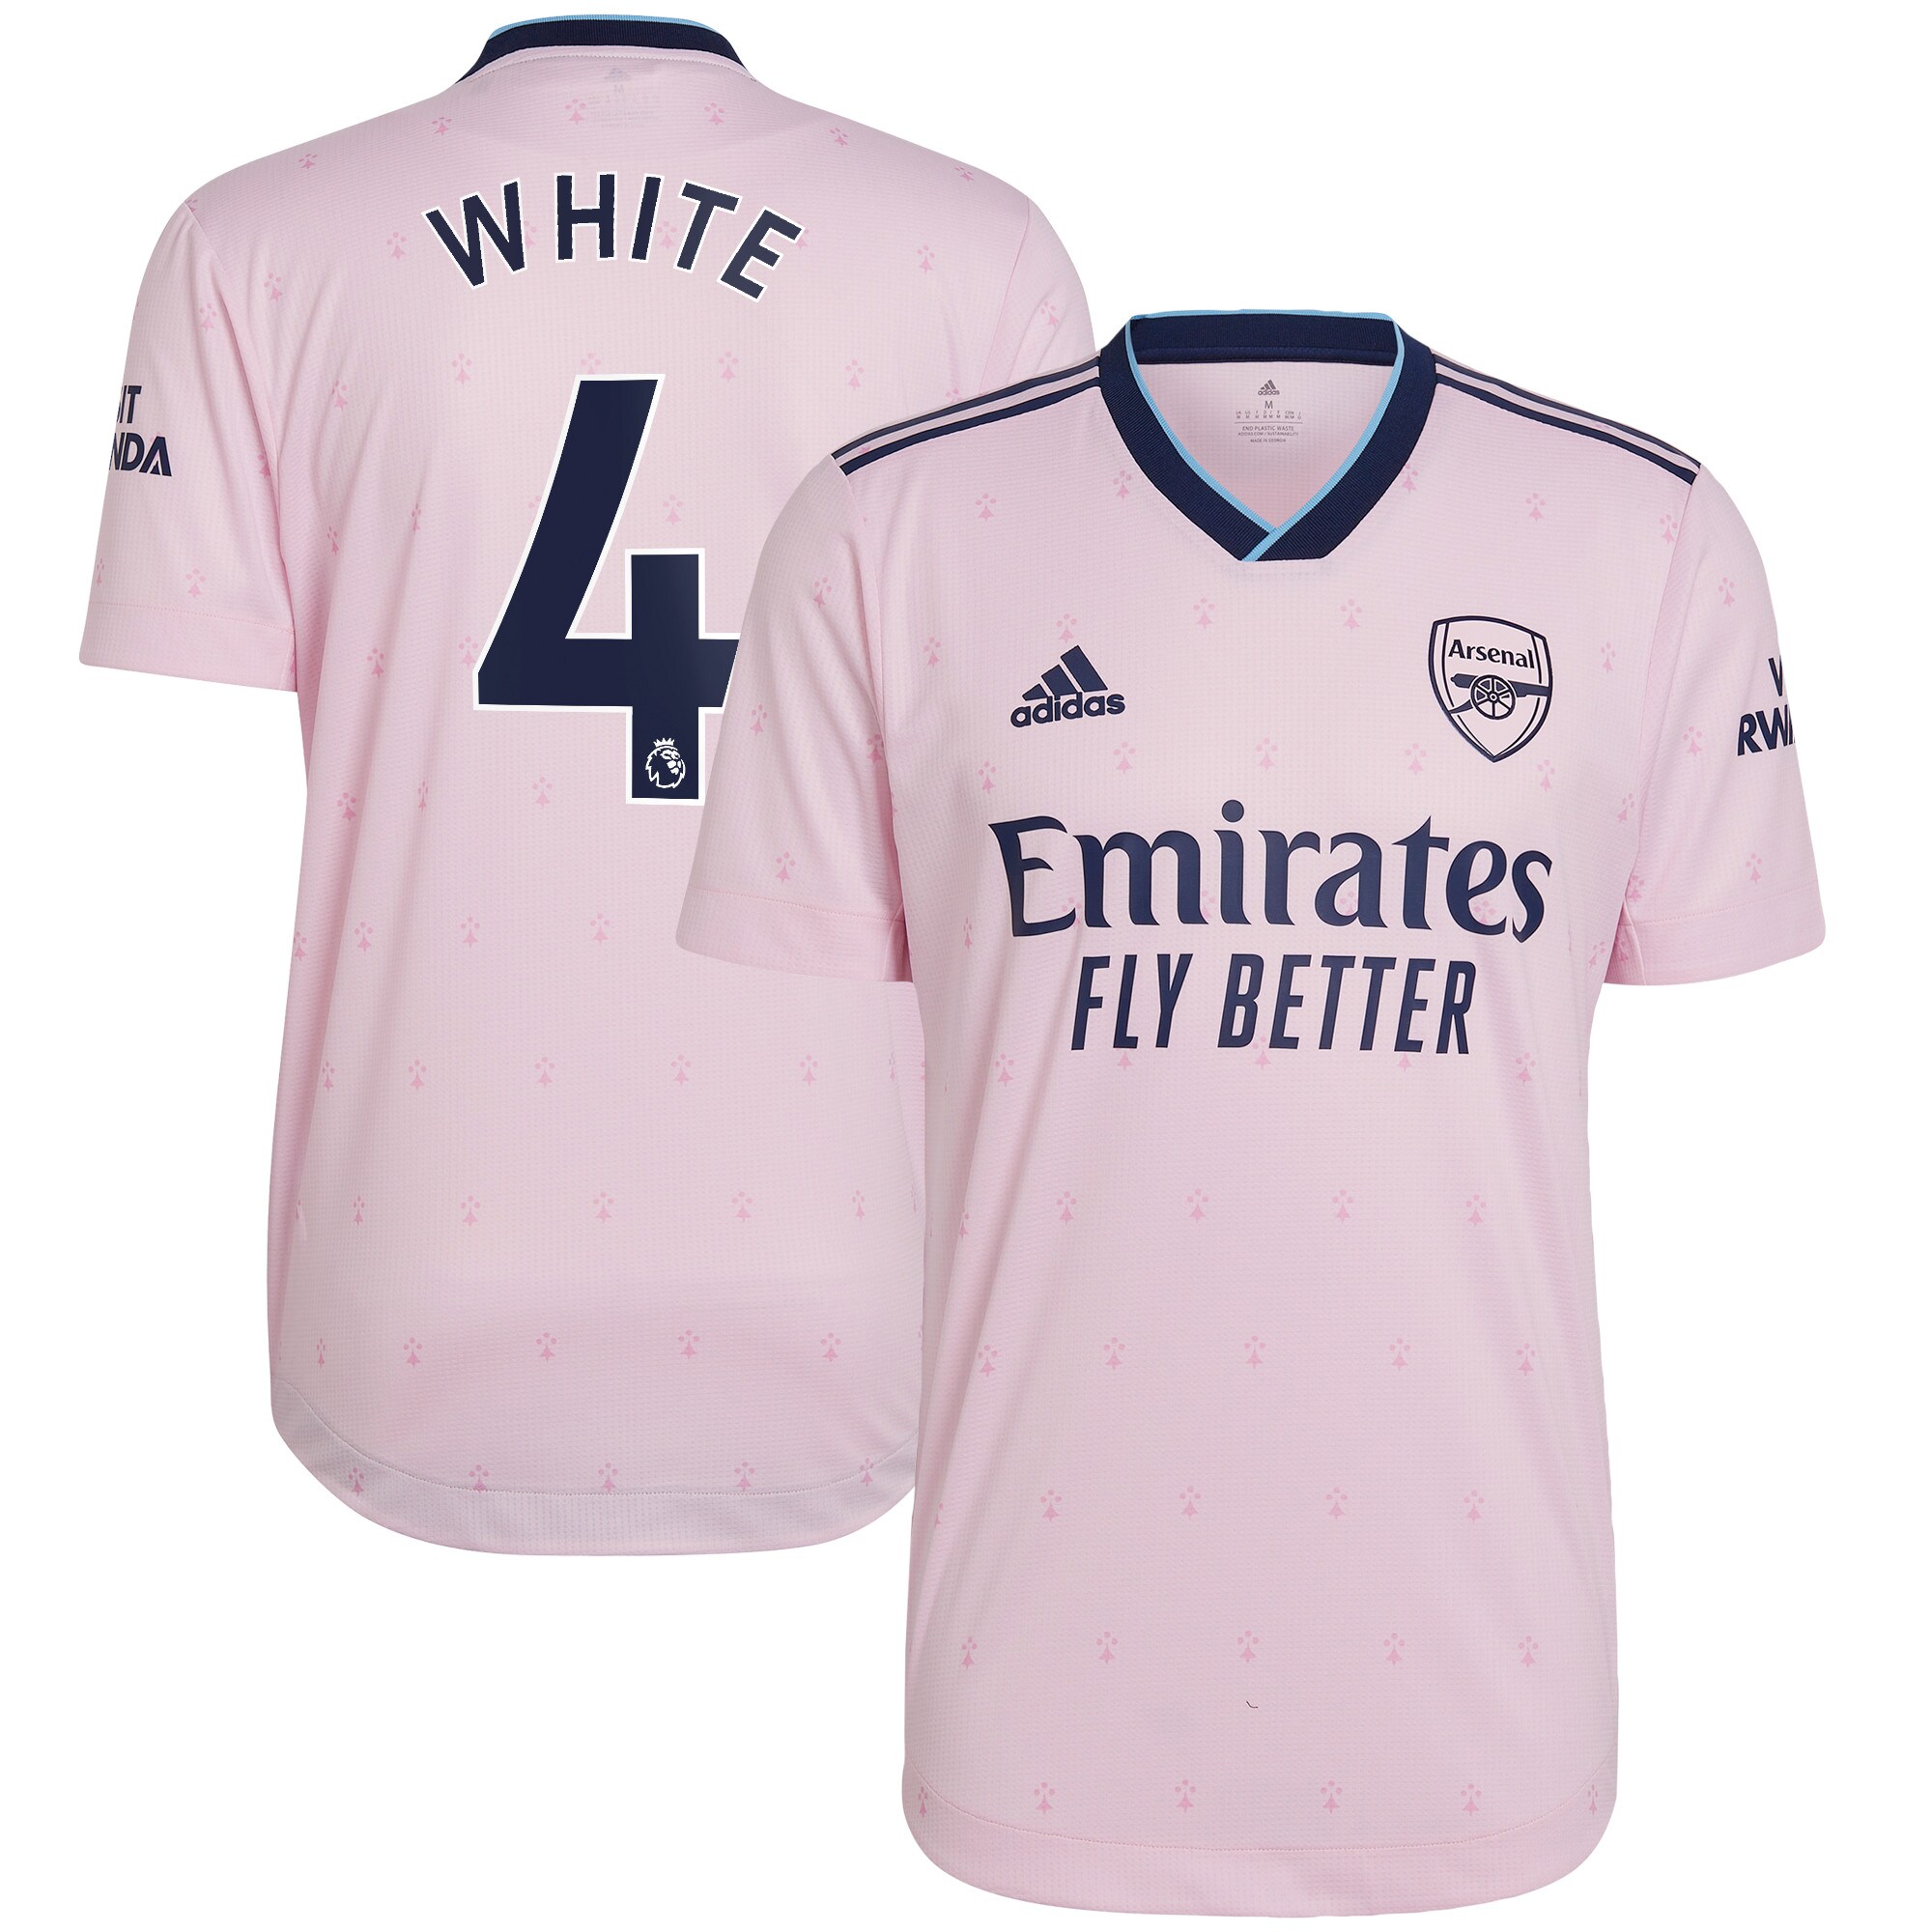 Arsenal Third Authentic Shirt 2022-23 with White 4 printing